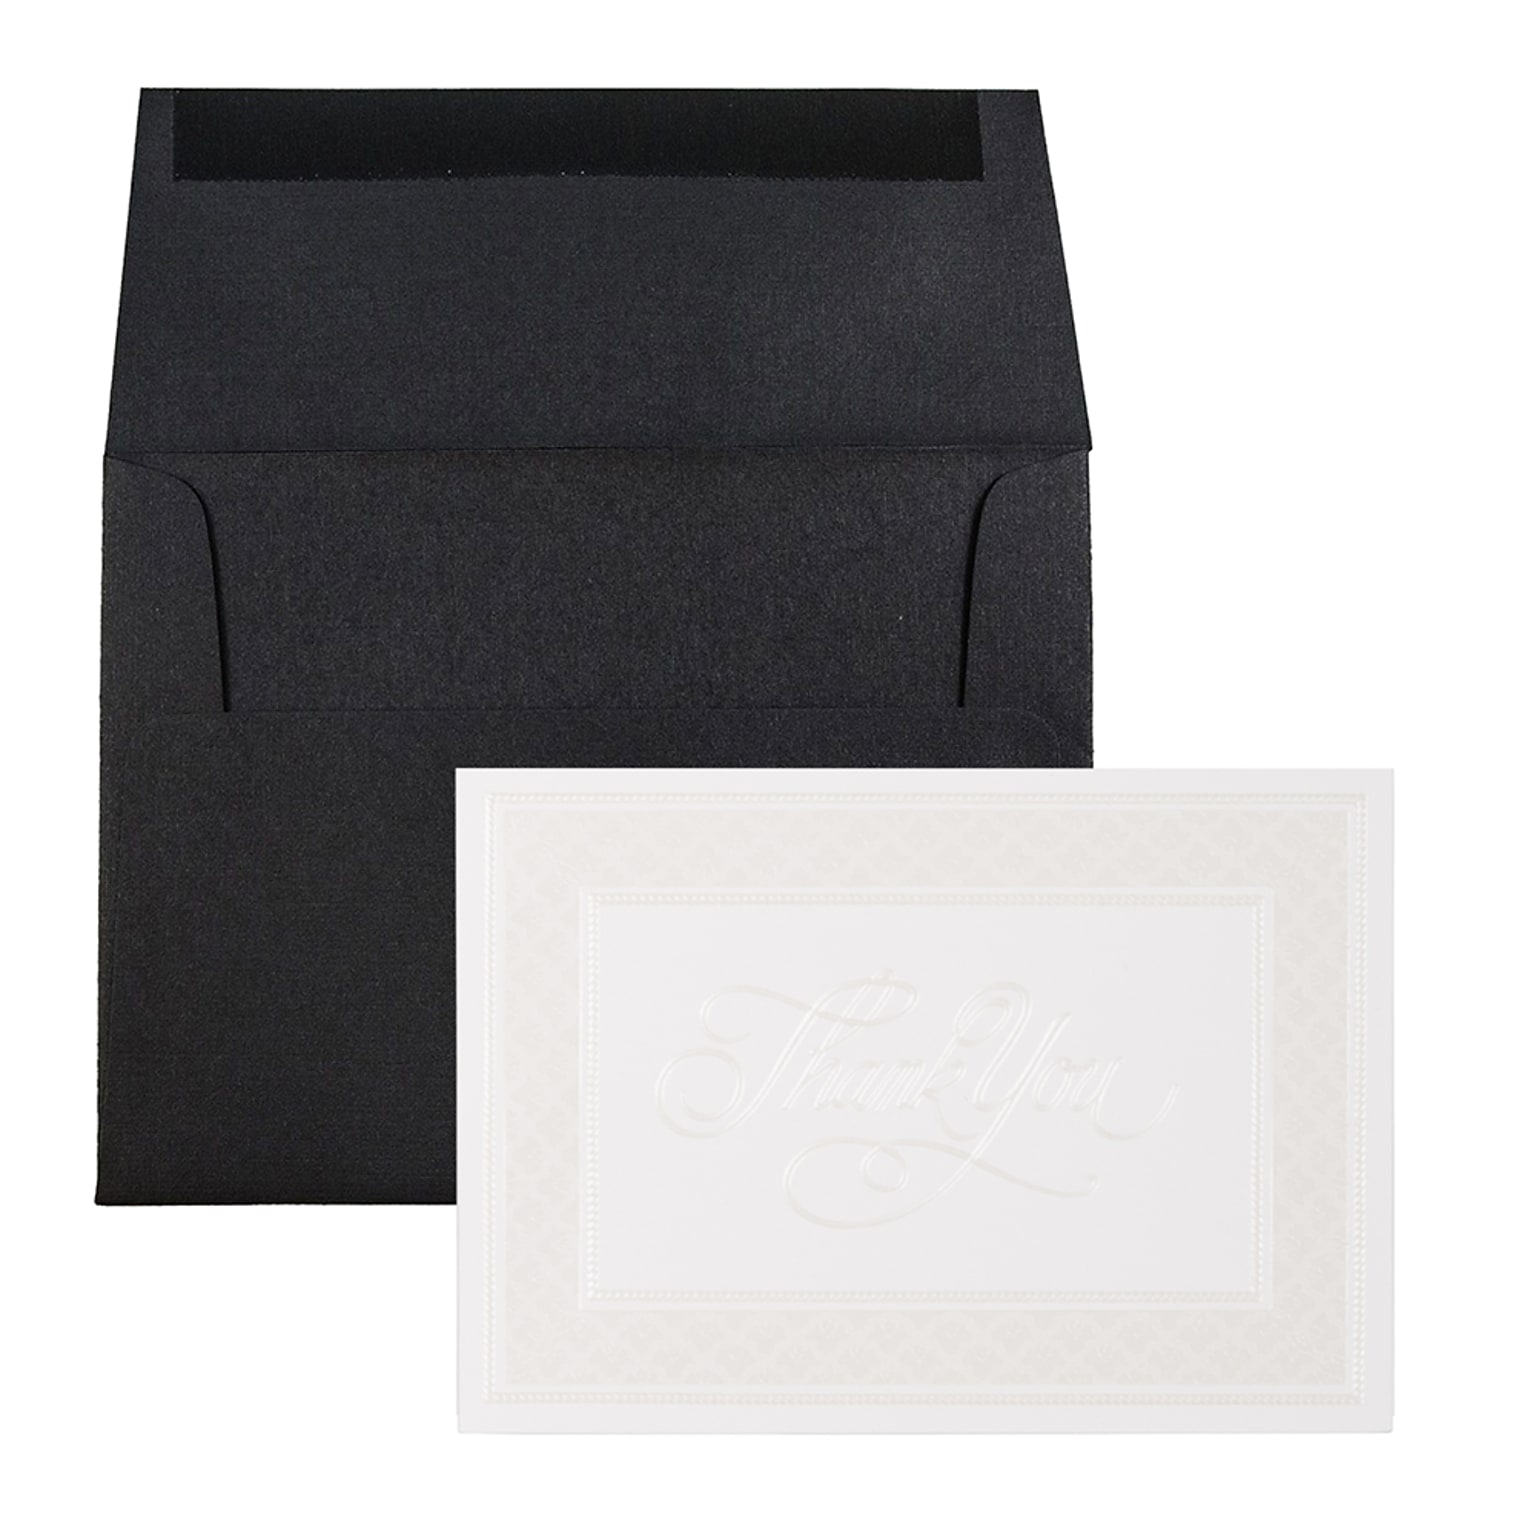 JAM PAPER Thank You Card Sets, Pearl Border Card with Black Linen Envelopes, 25 Cards and Envelopes (52678780)